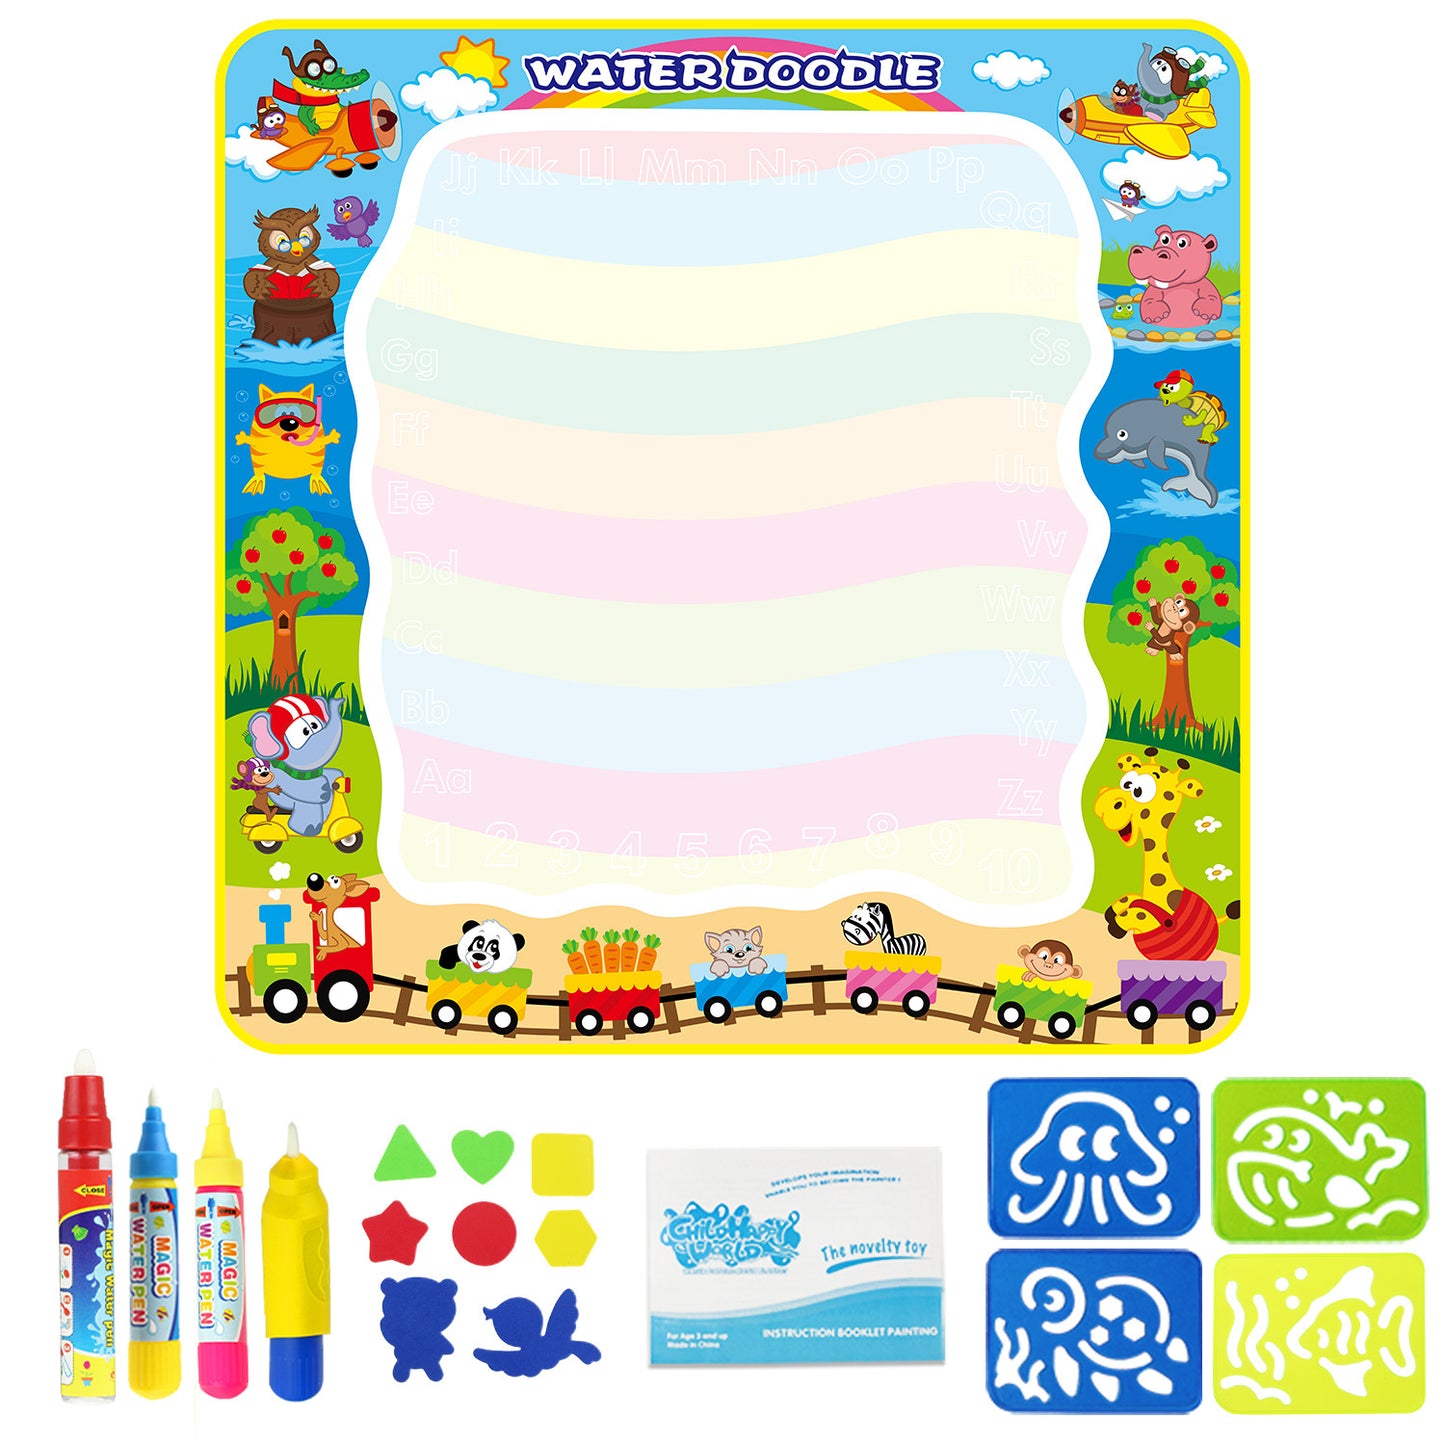 100 * 100 alphabet animal water canvas can be customized children's enlightenment educational toys